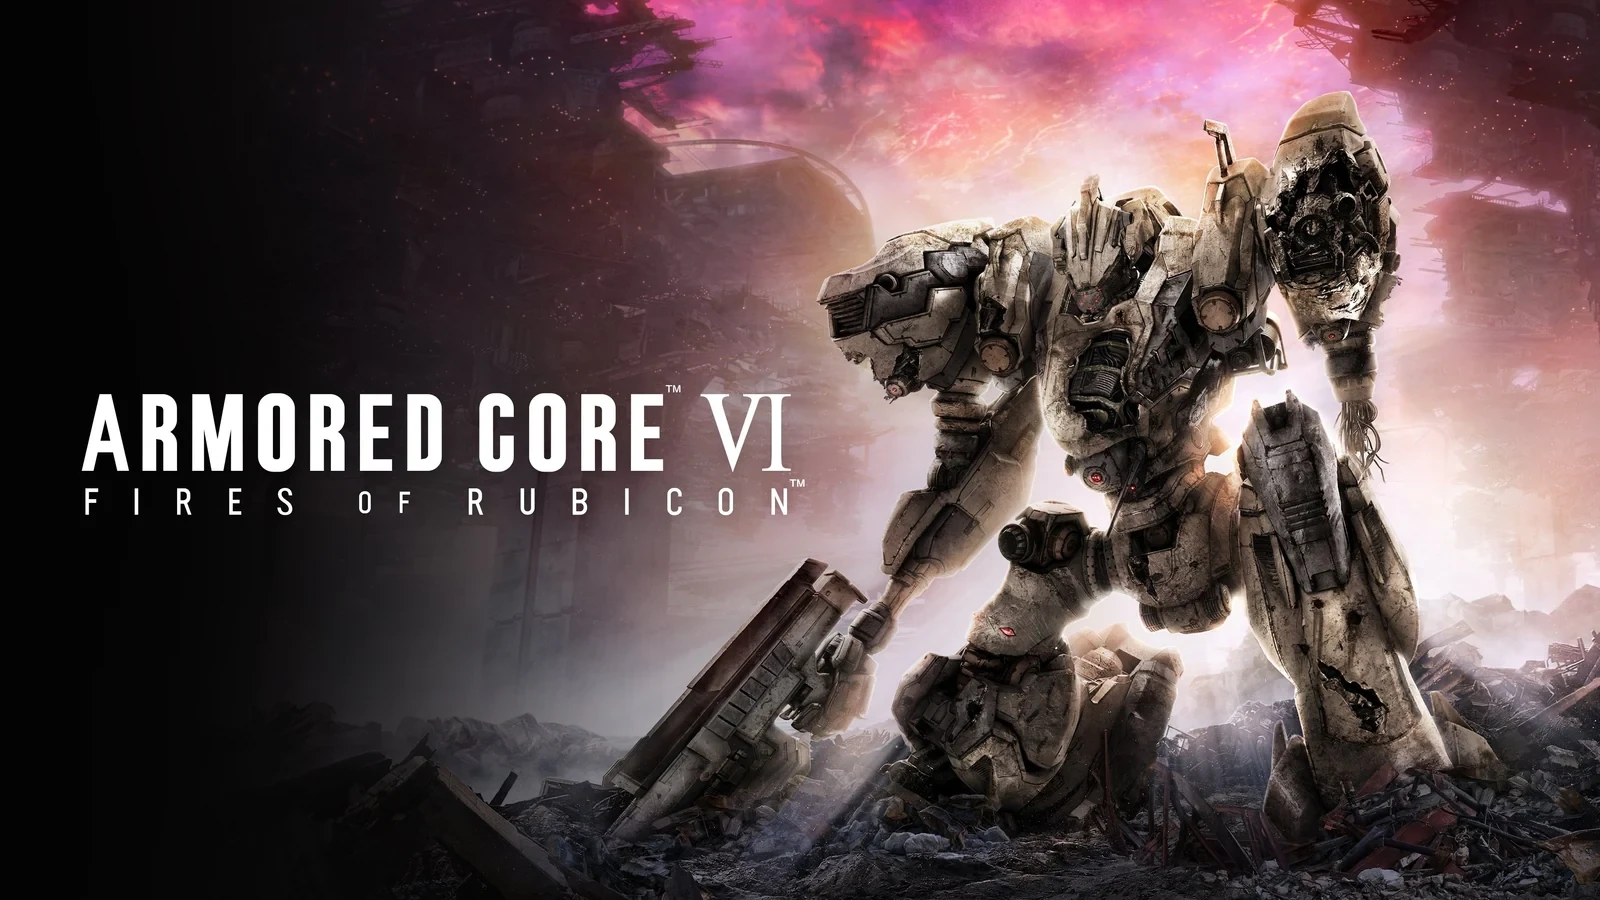 Main Cover for Armored Core VI: Fires of Rubicon | Image Credits: FromSoftware
